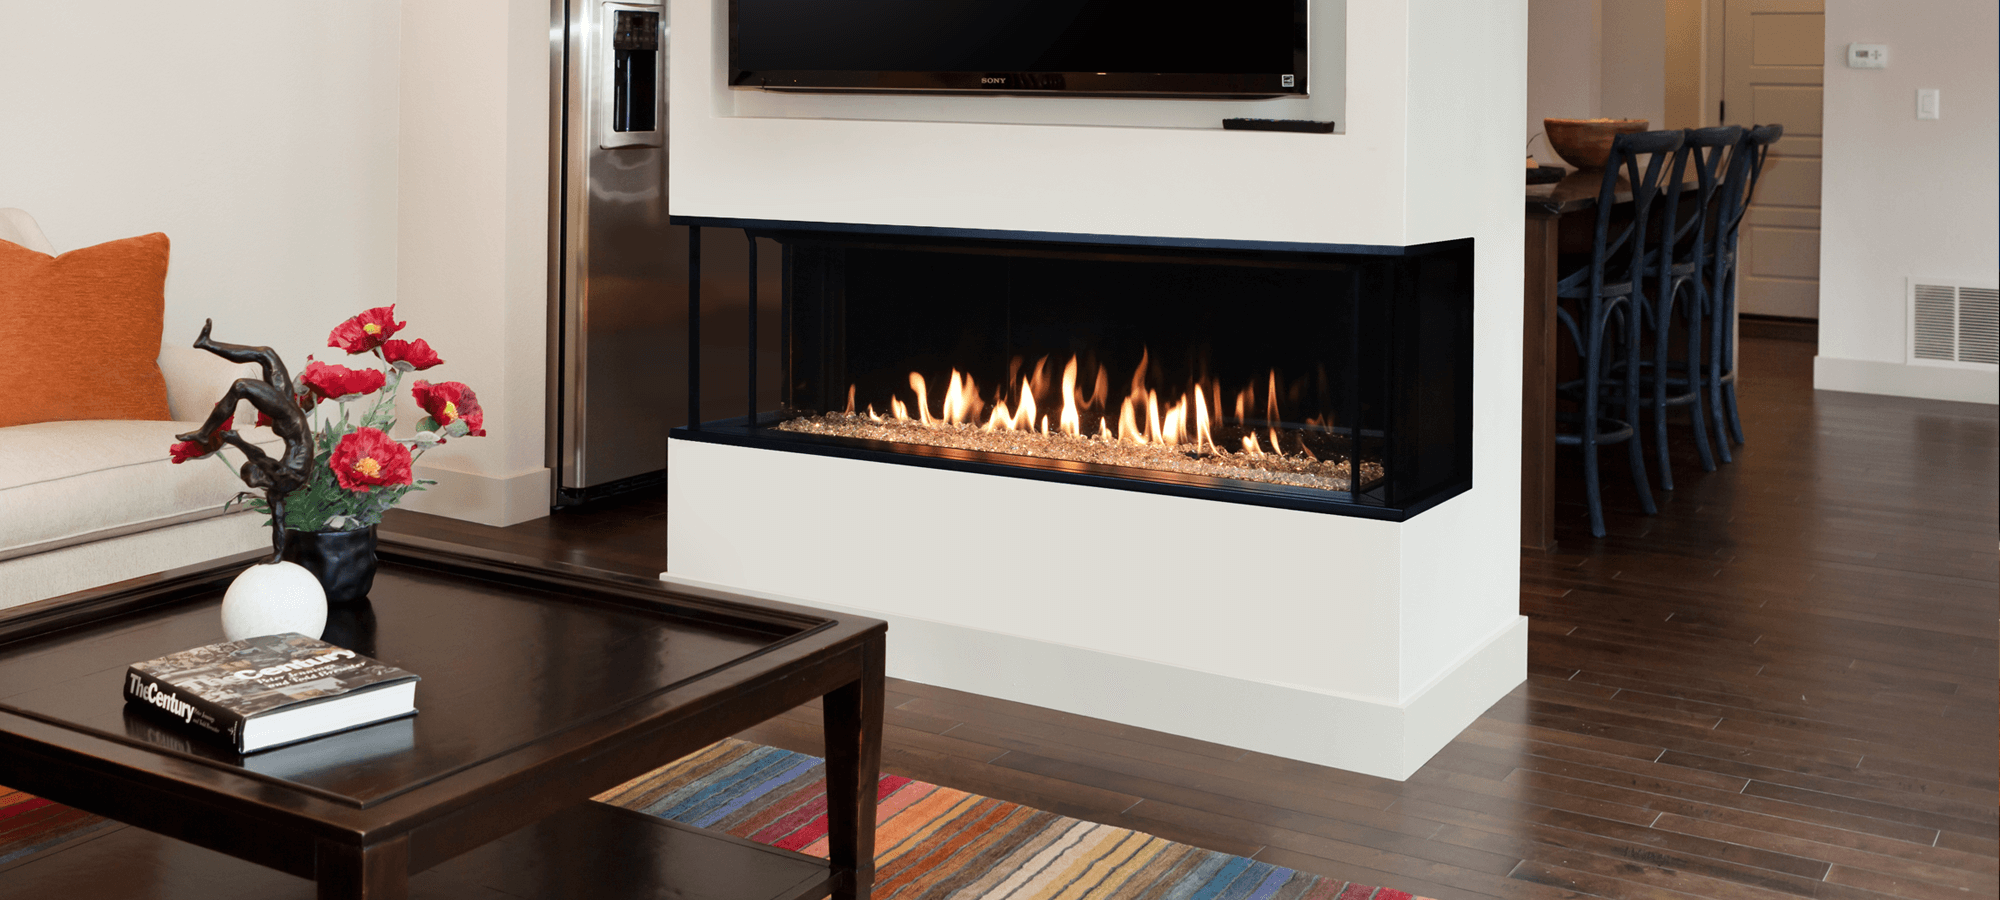 Valor fireplaces are designed & manufactured in North Vancouver BC